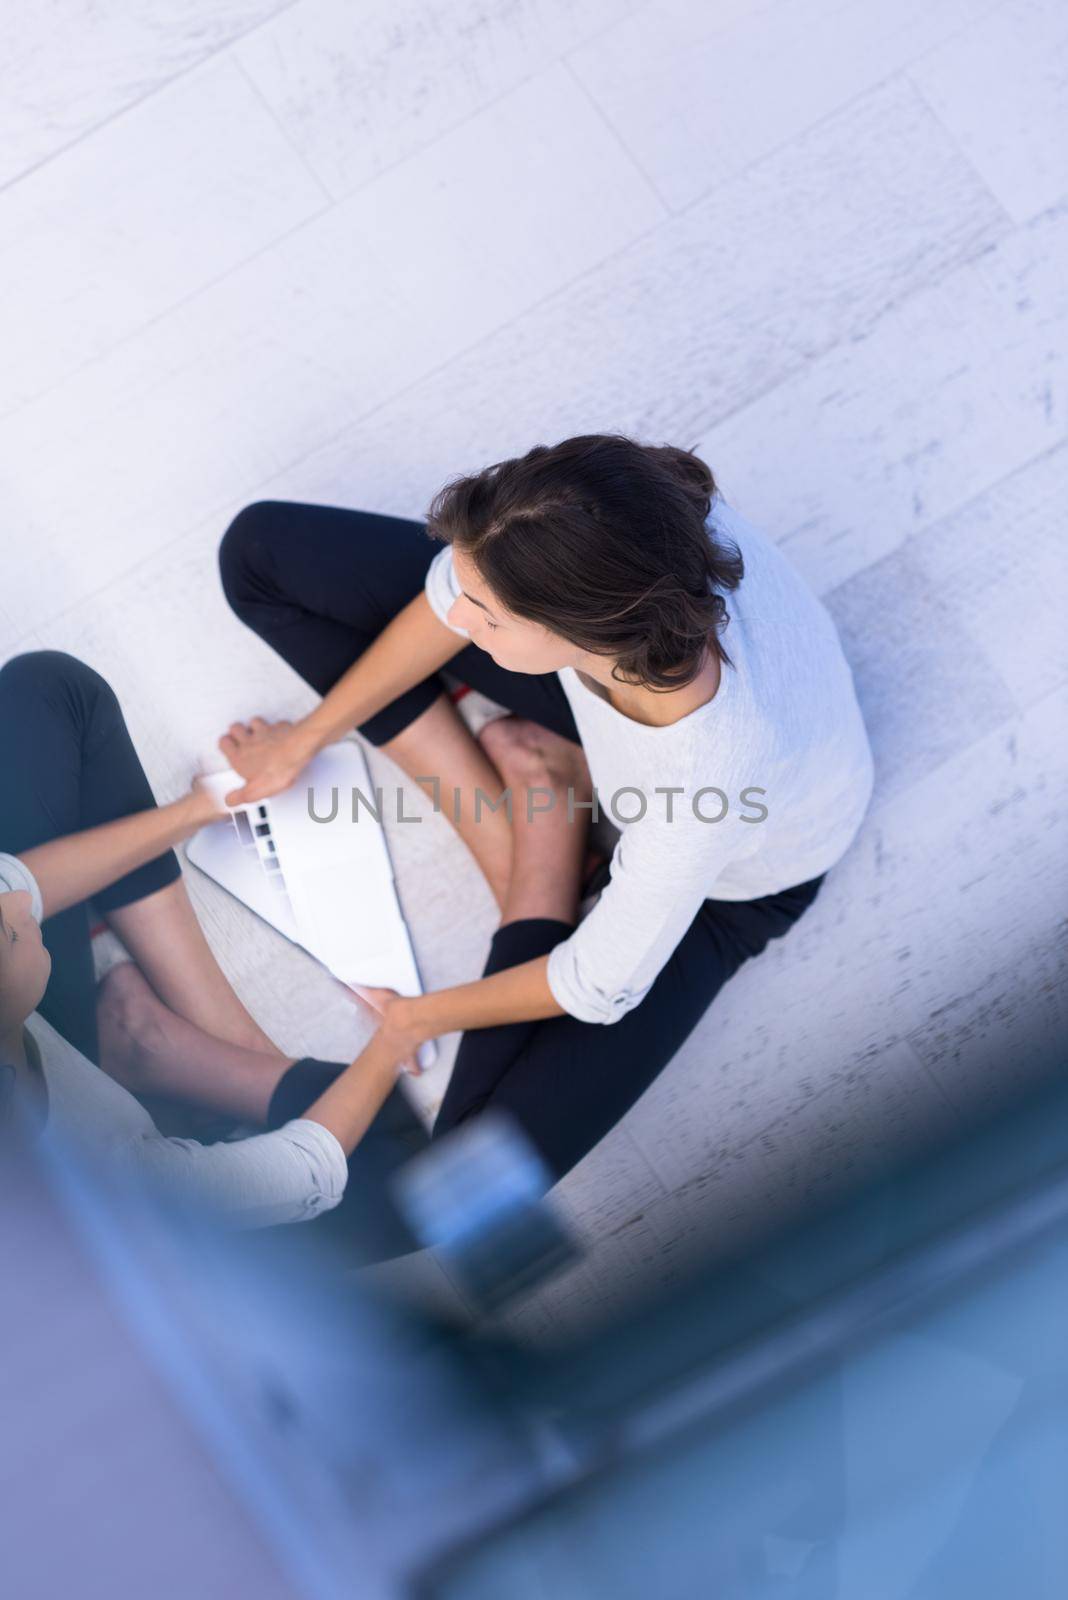 top view of a beautiful young women using laptop computer on the floor at home